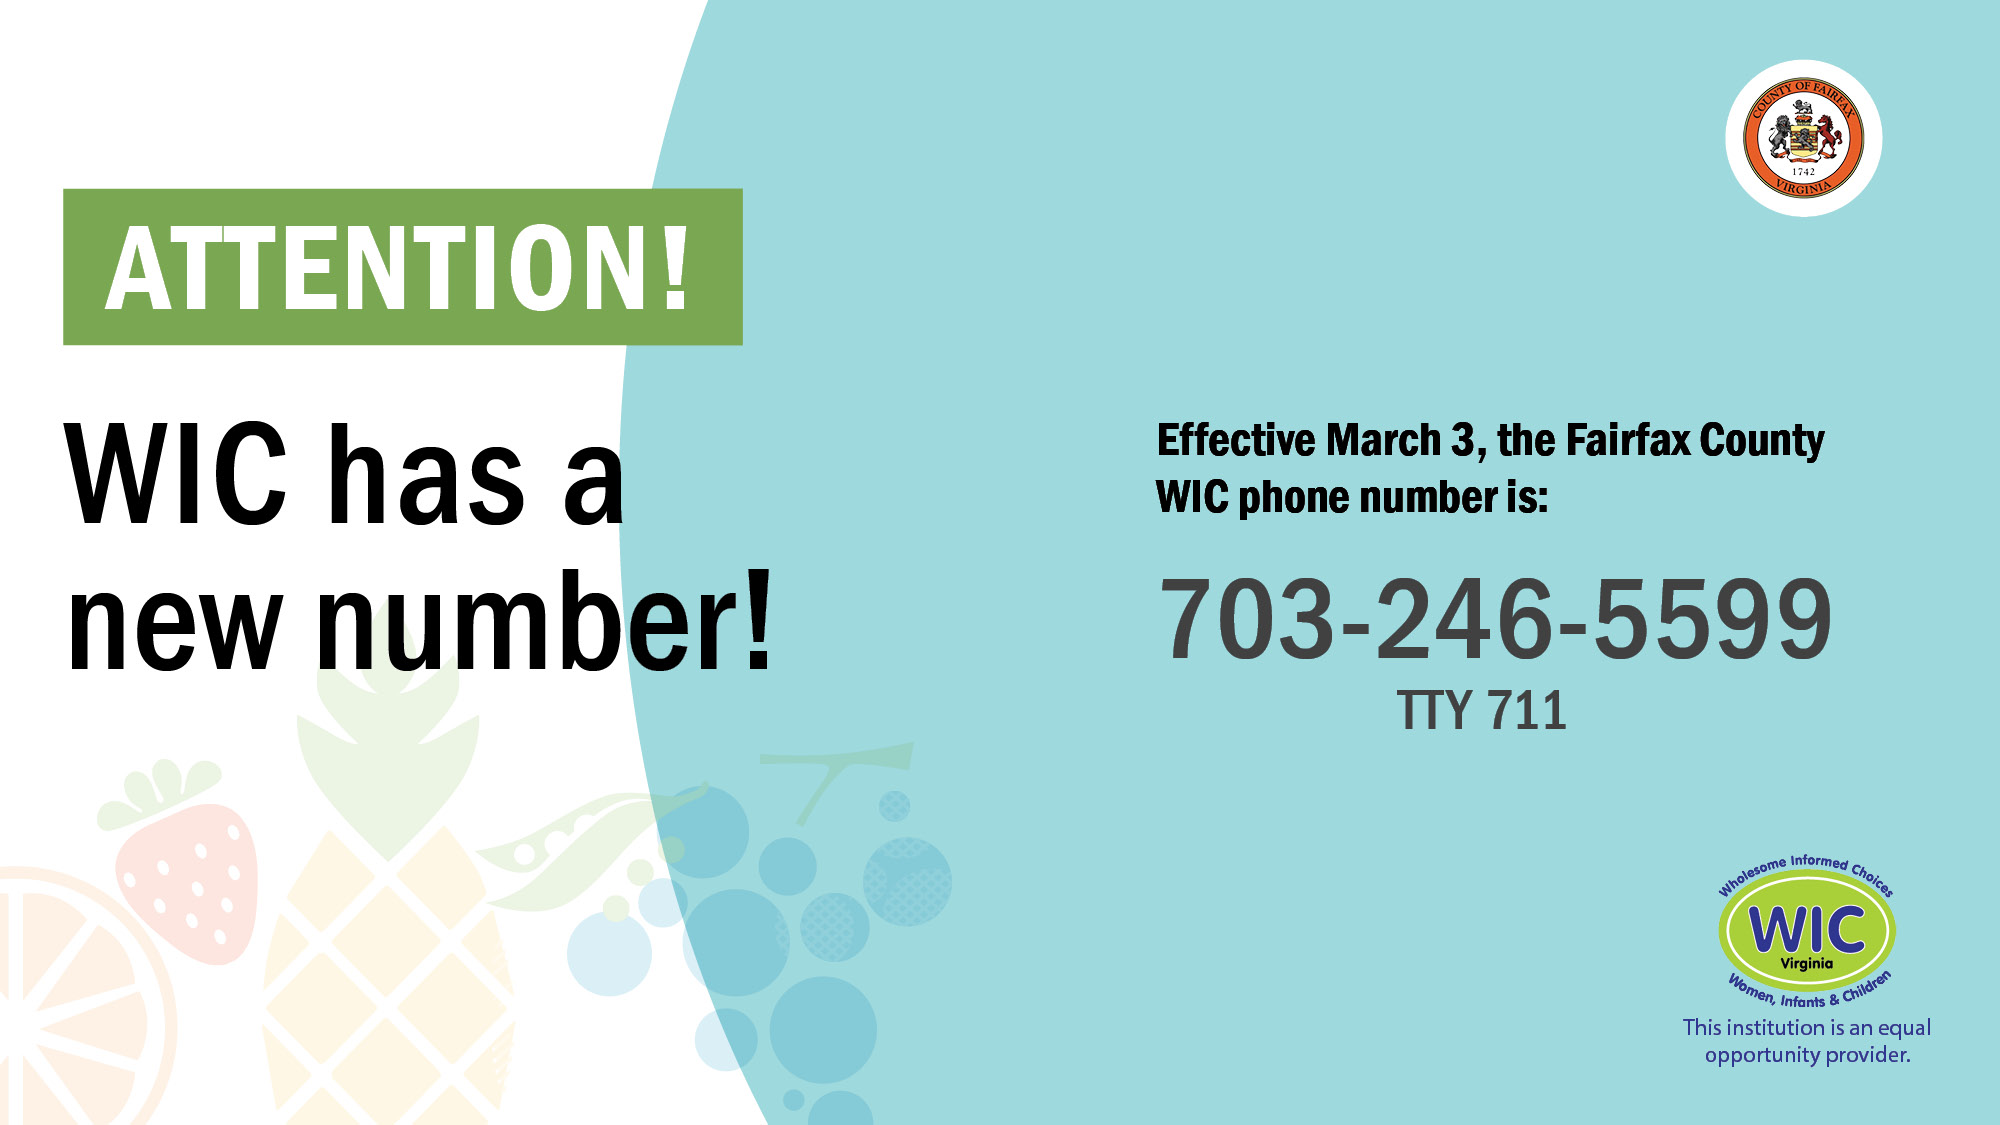 Attention! WIC has a newnumber. Effective March 3, the Fairfax County WIC phone number is 703-246-5599. TTY 711.